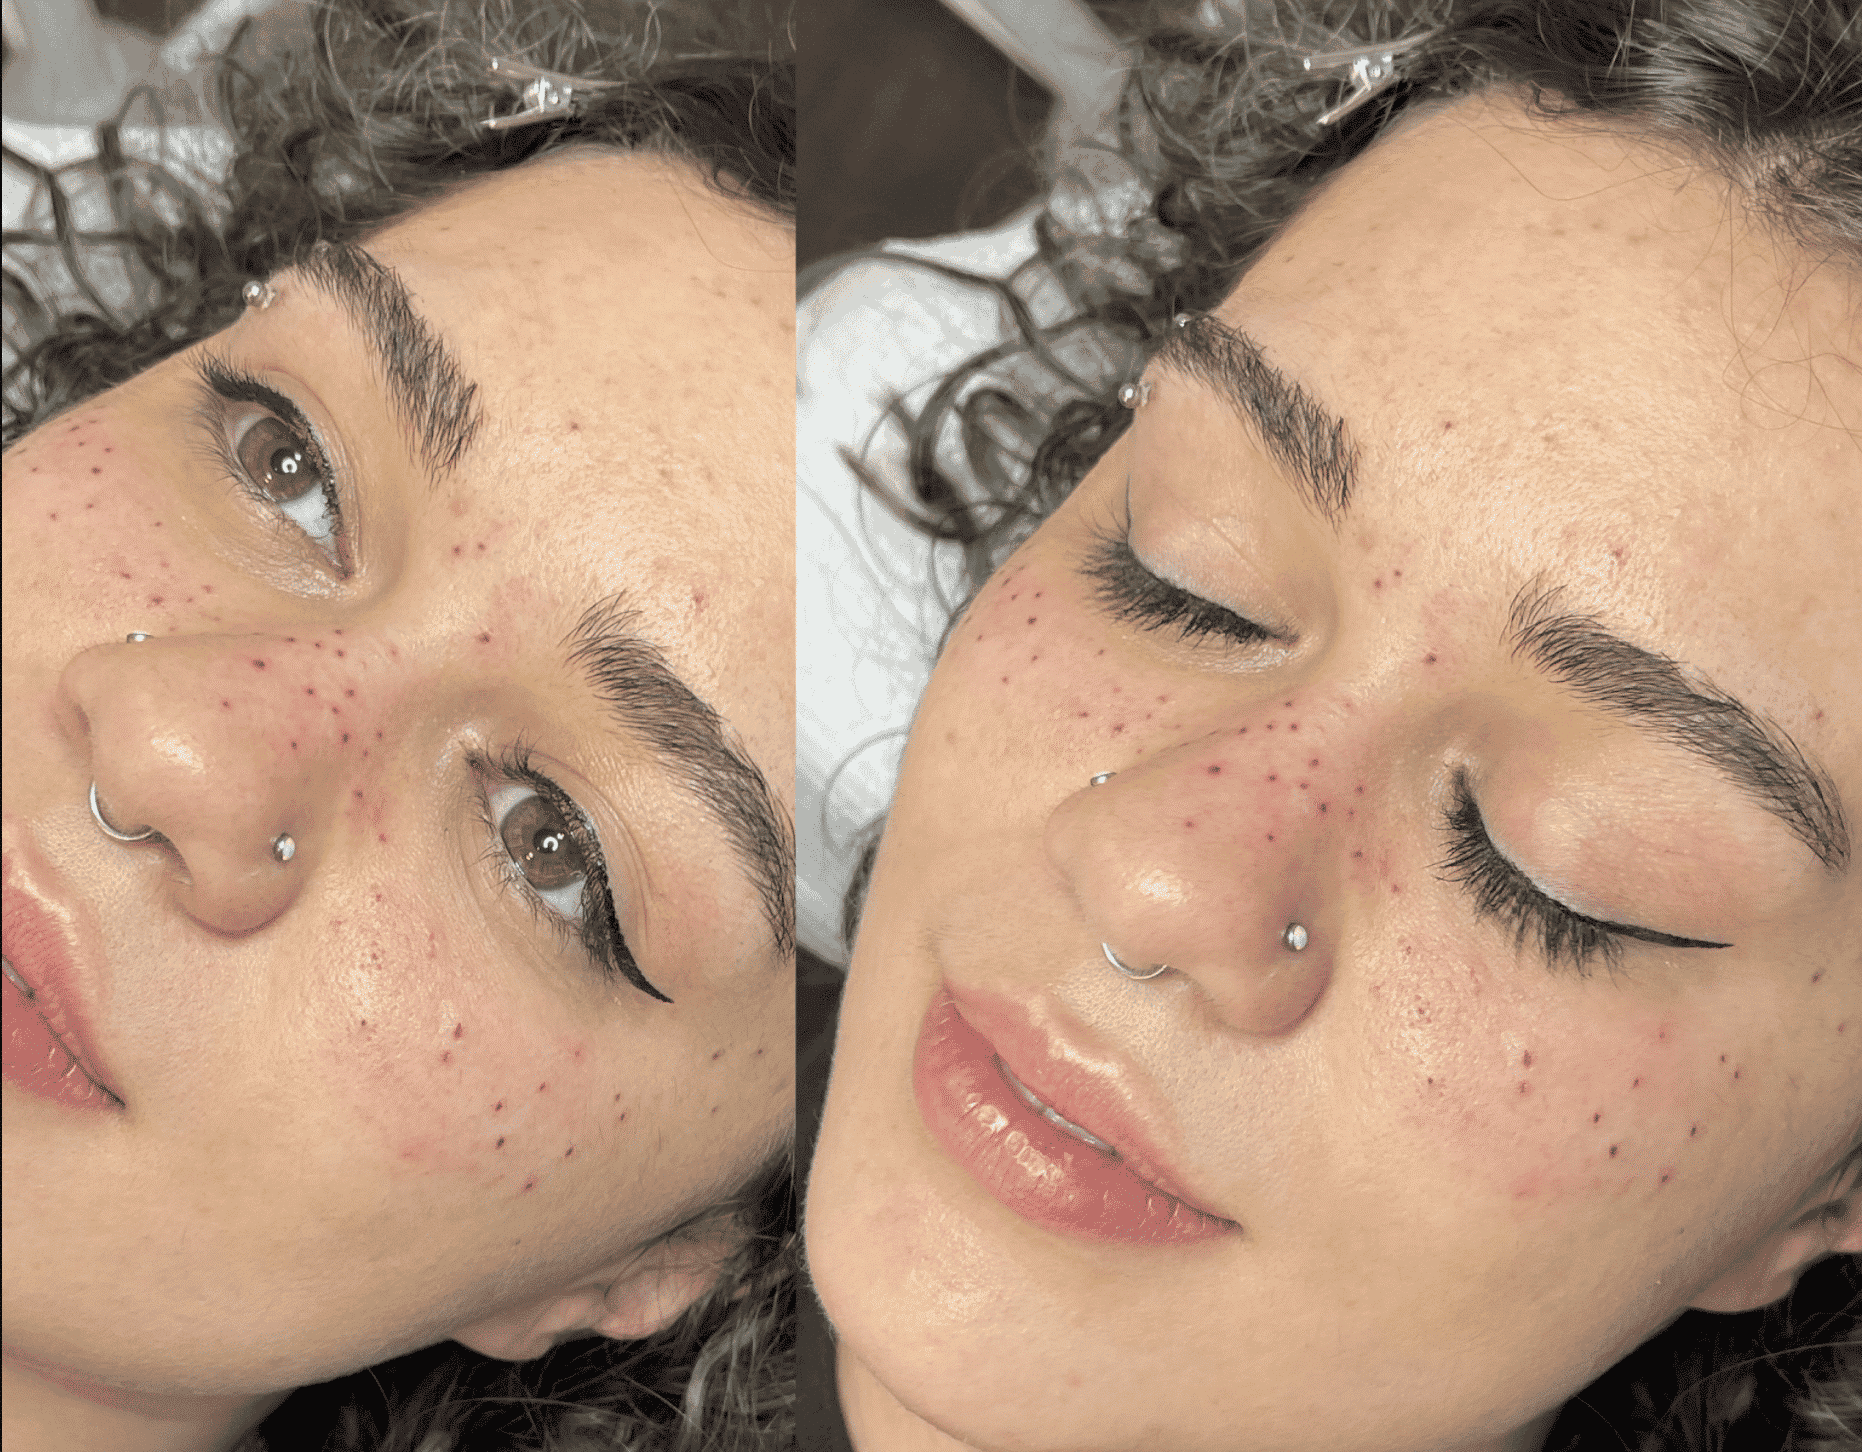 What Are Permanent Freckles? - Killer Beauty